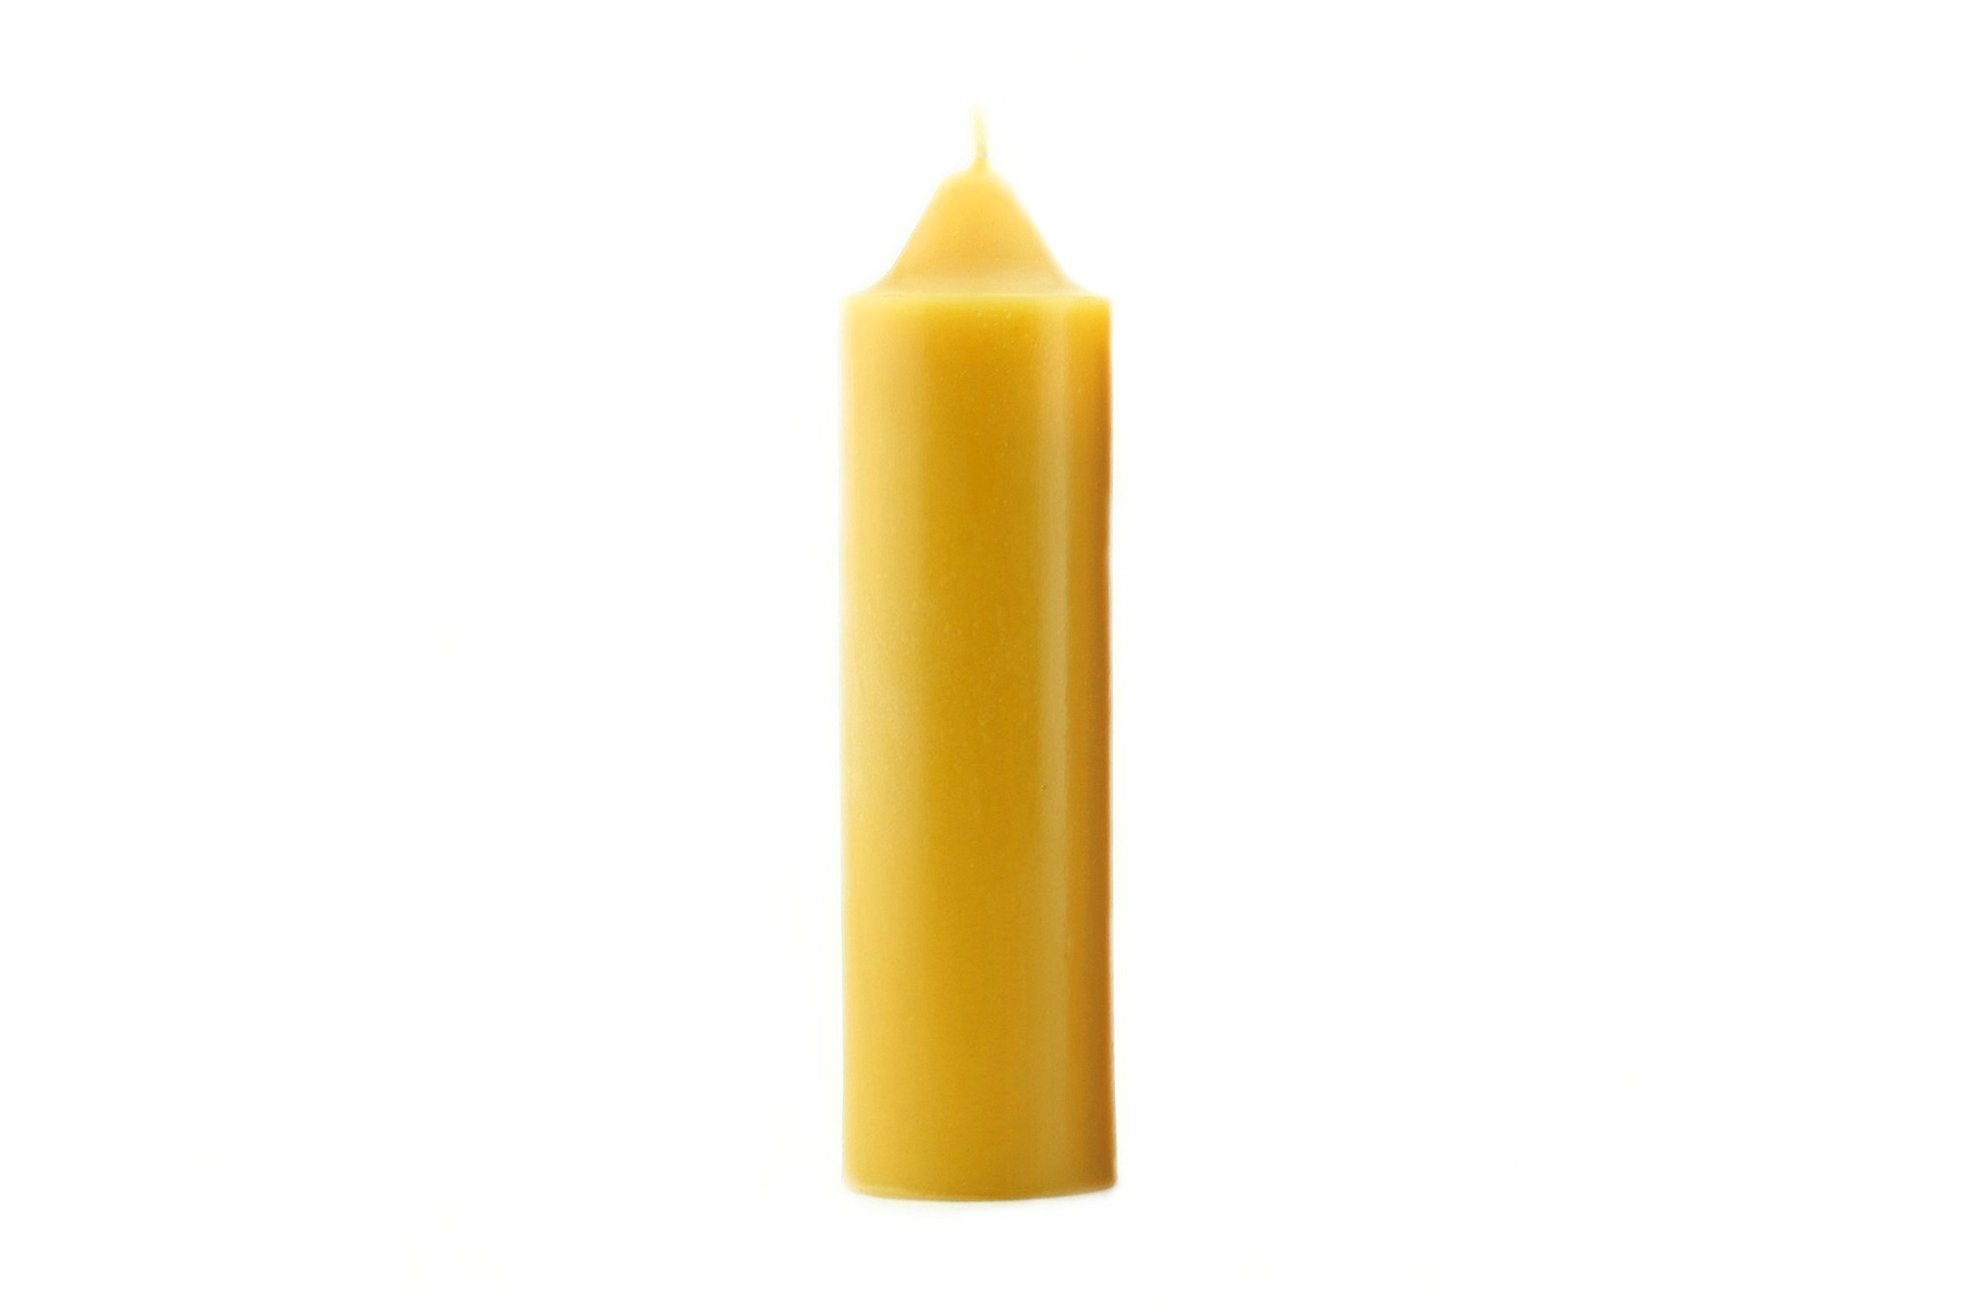 Beeswax Emergency Candles